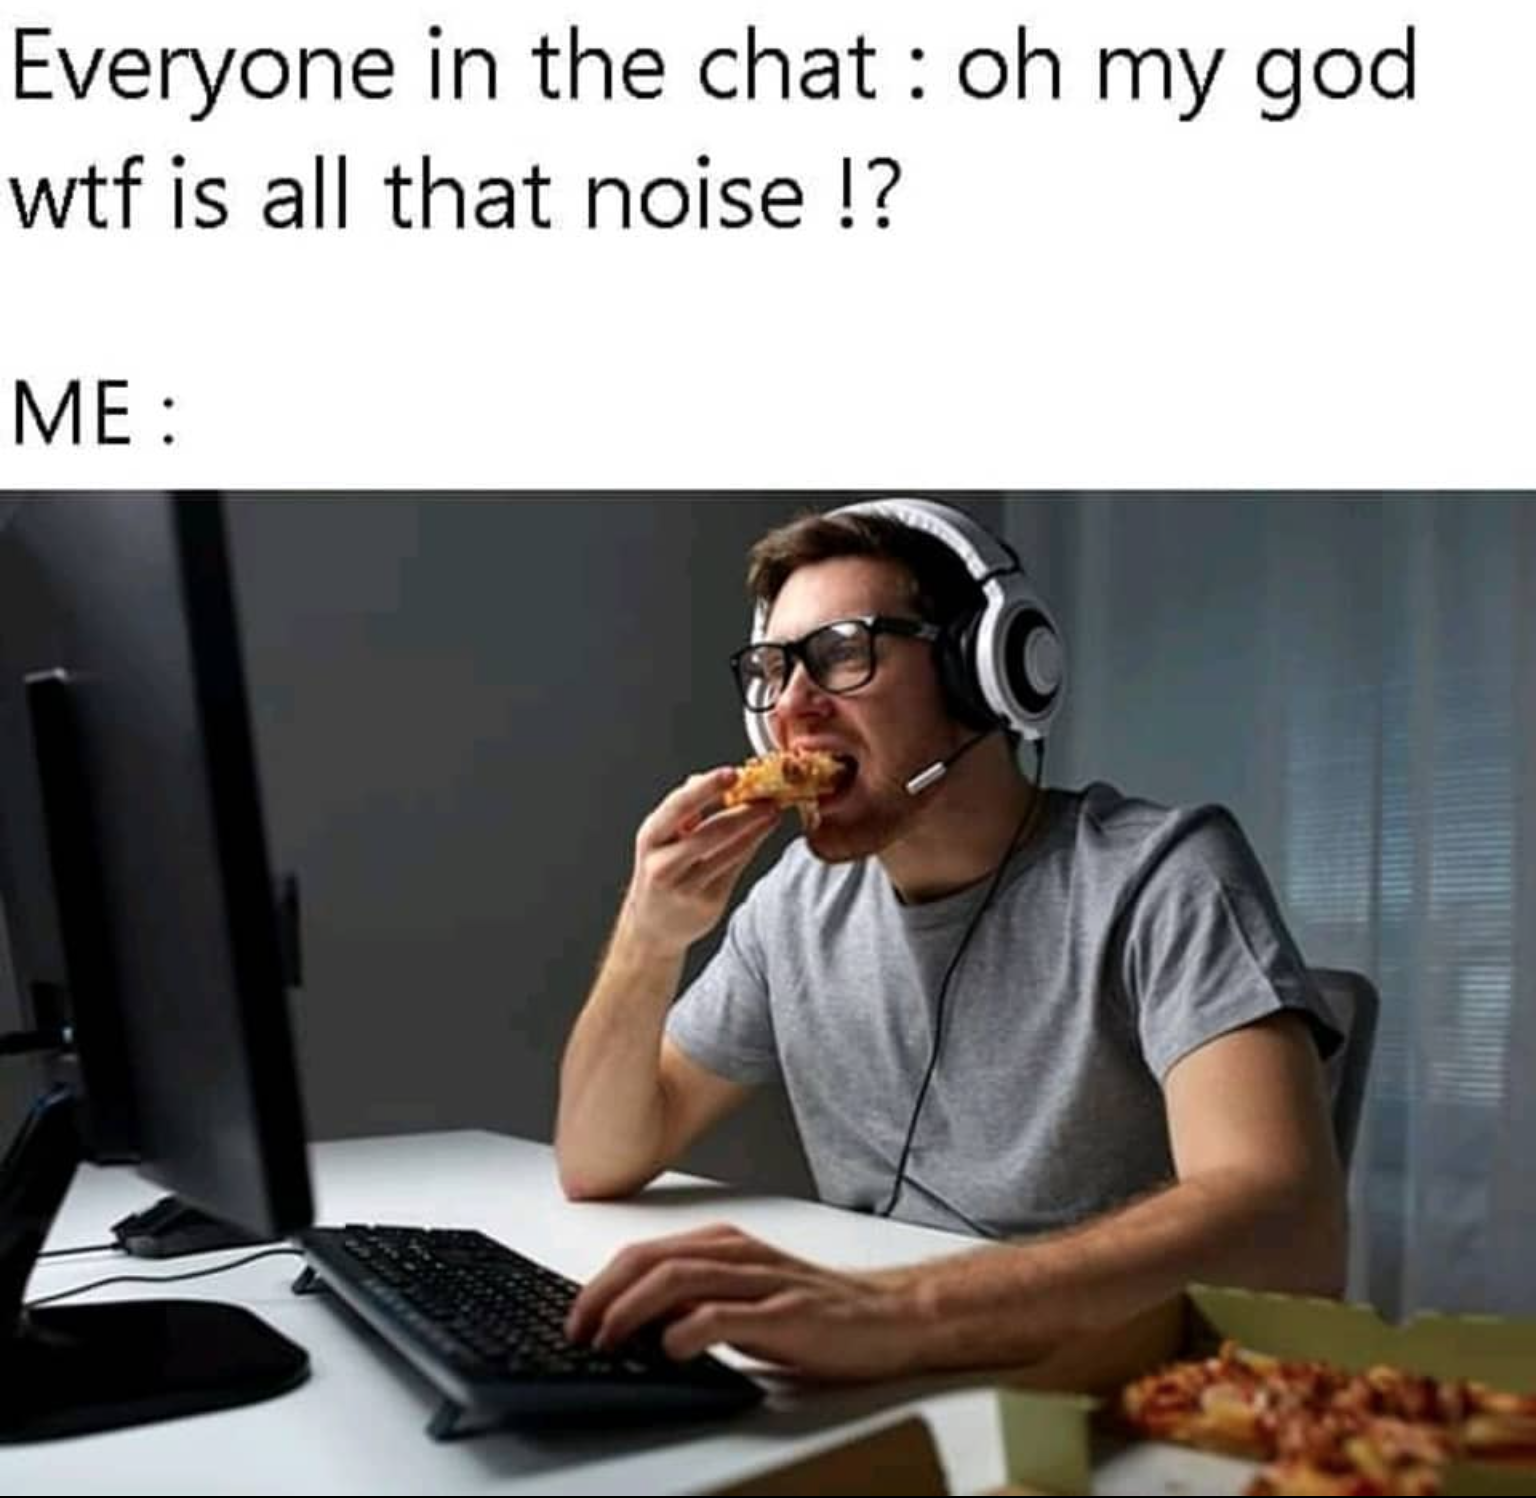 funny gaming memes - human behavior - Everyone in the chat oh my god wtf is all that noise !? Me